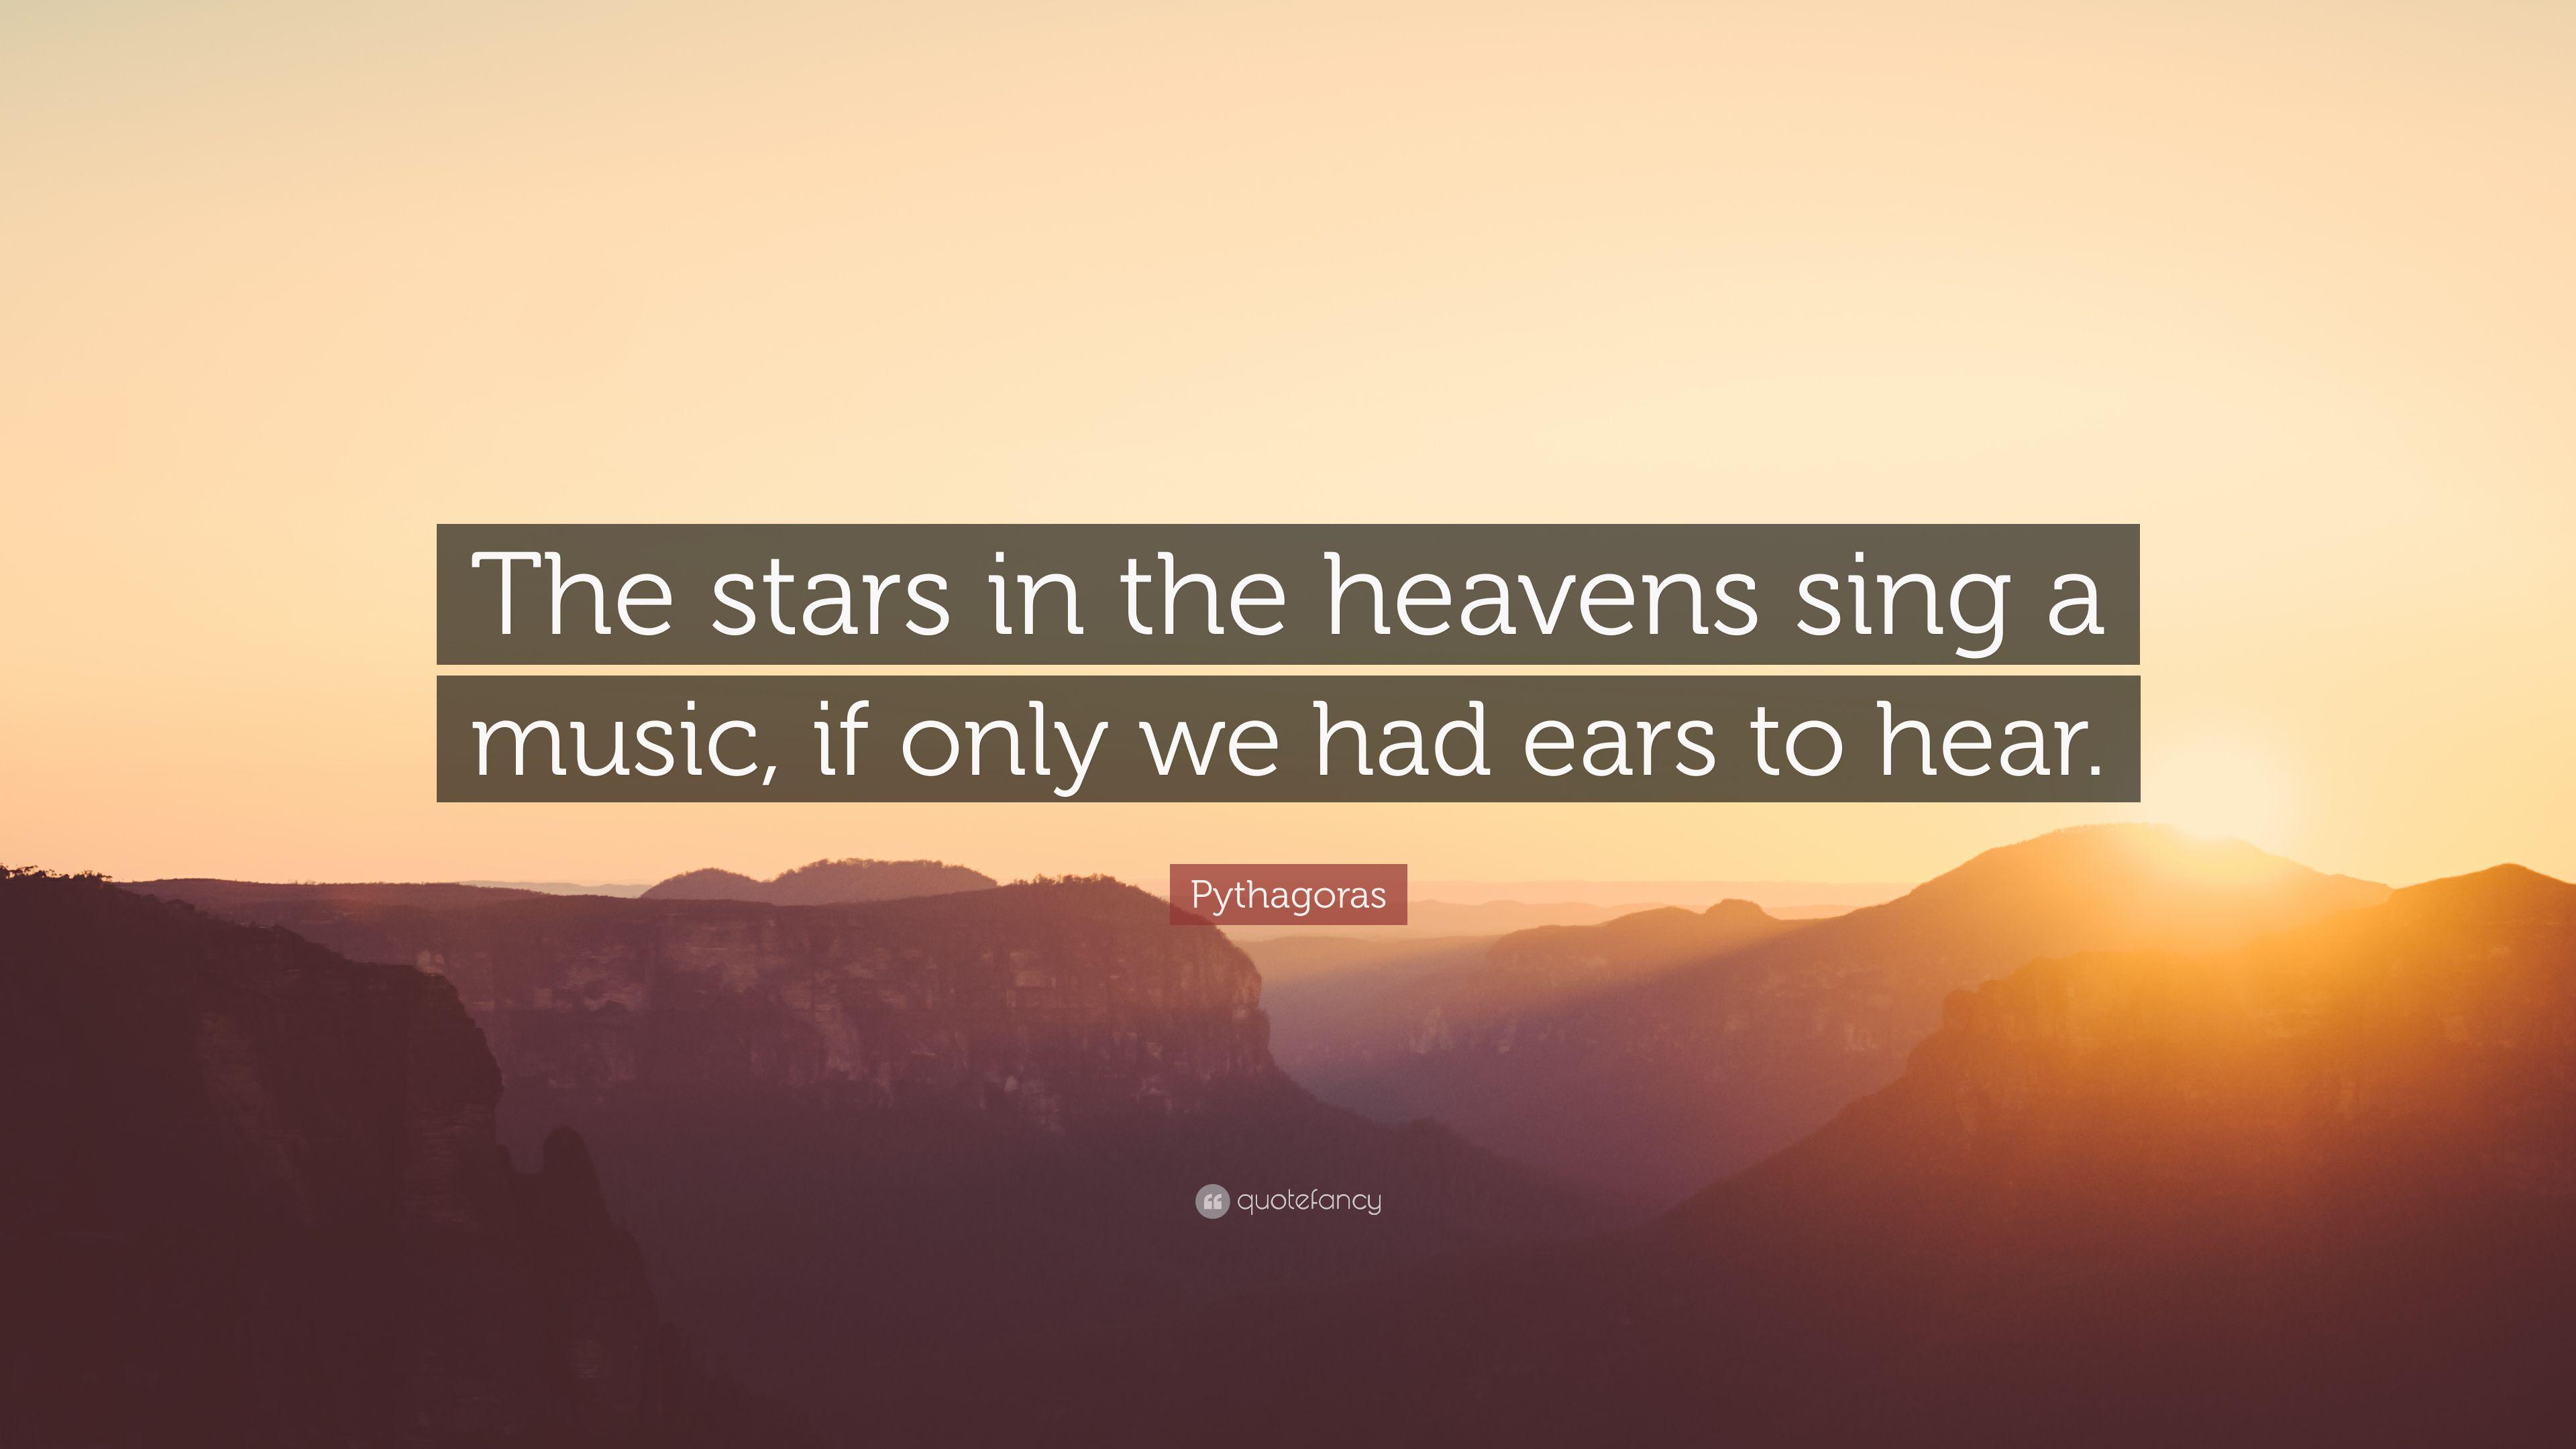 Pythagoras Quote: “The stars in the heavens sing a music, if only we